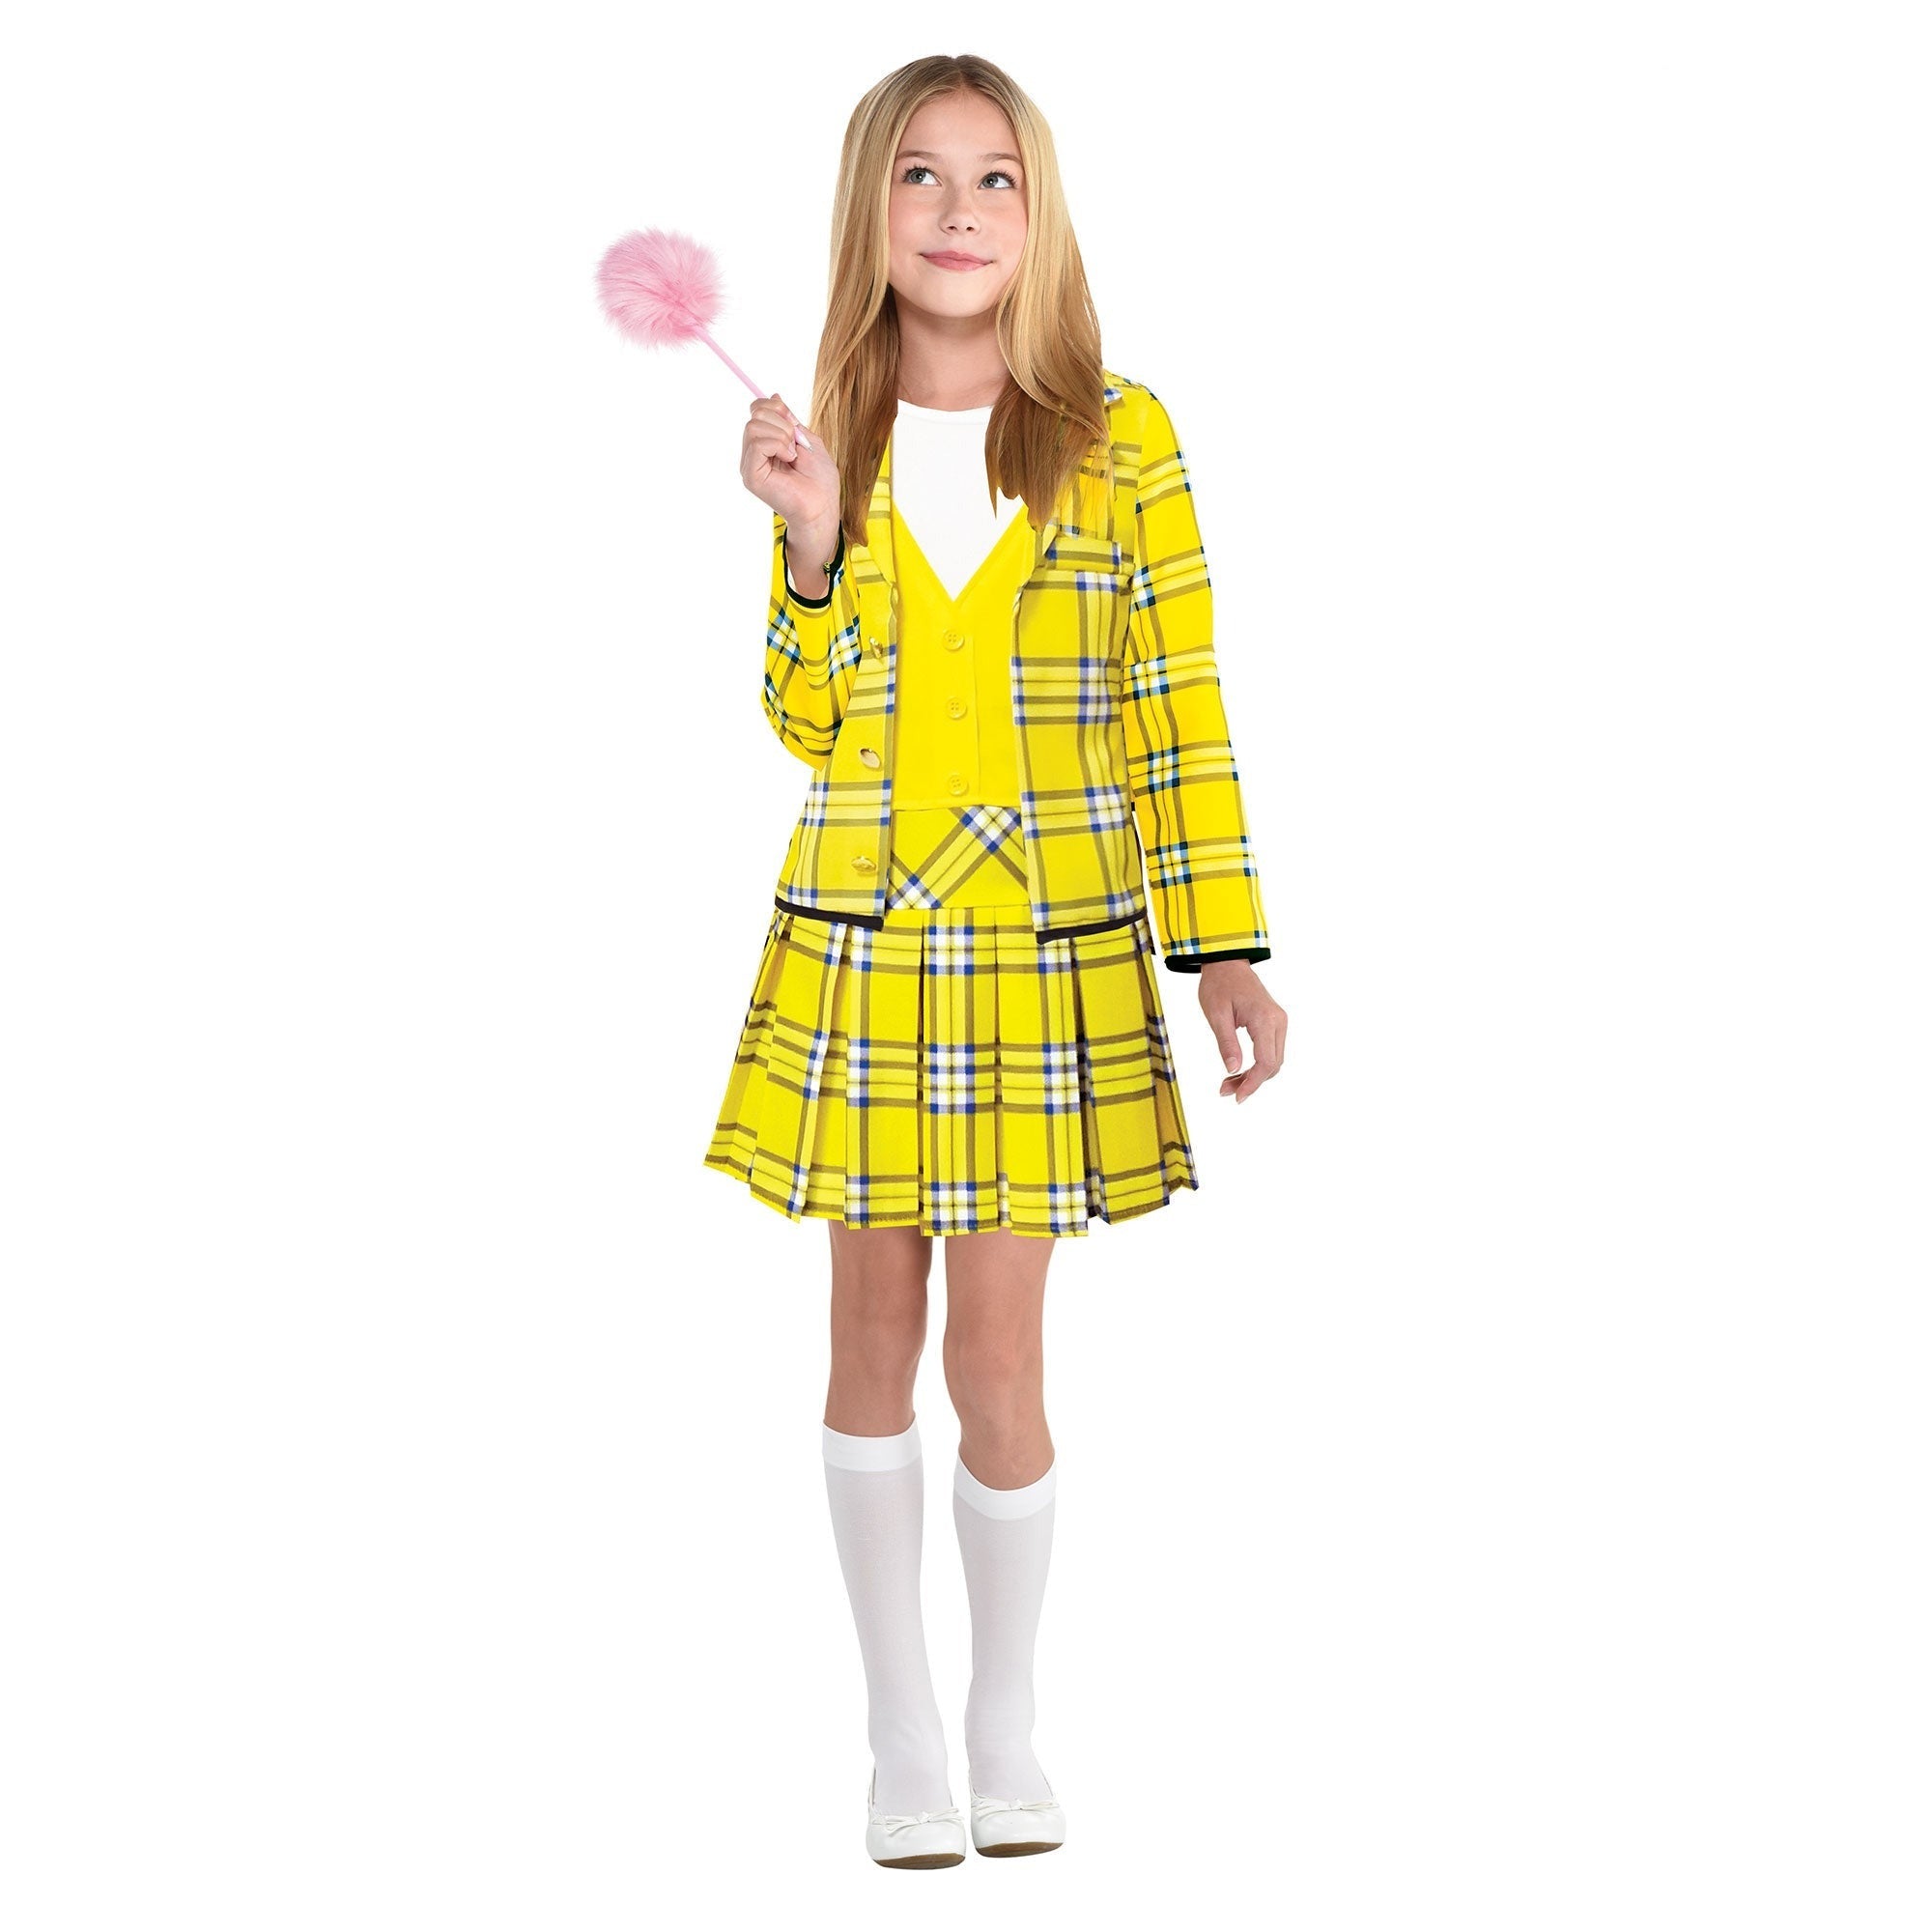 Costume Clueless 10-12 Years Dress with Attached Jacket